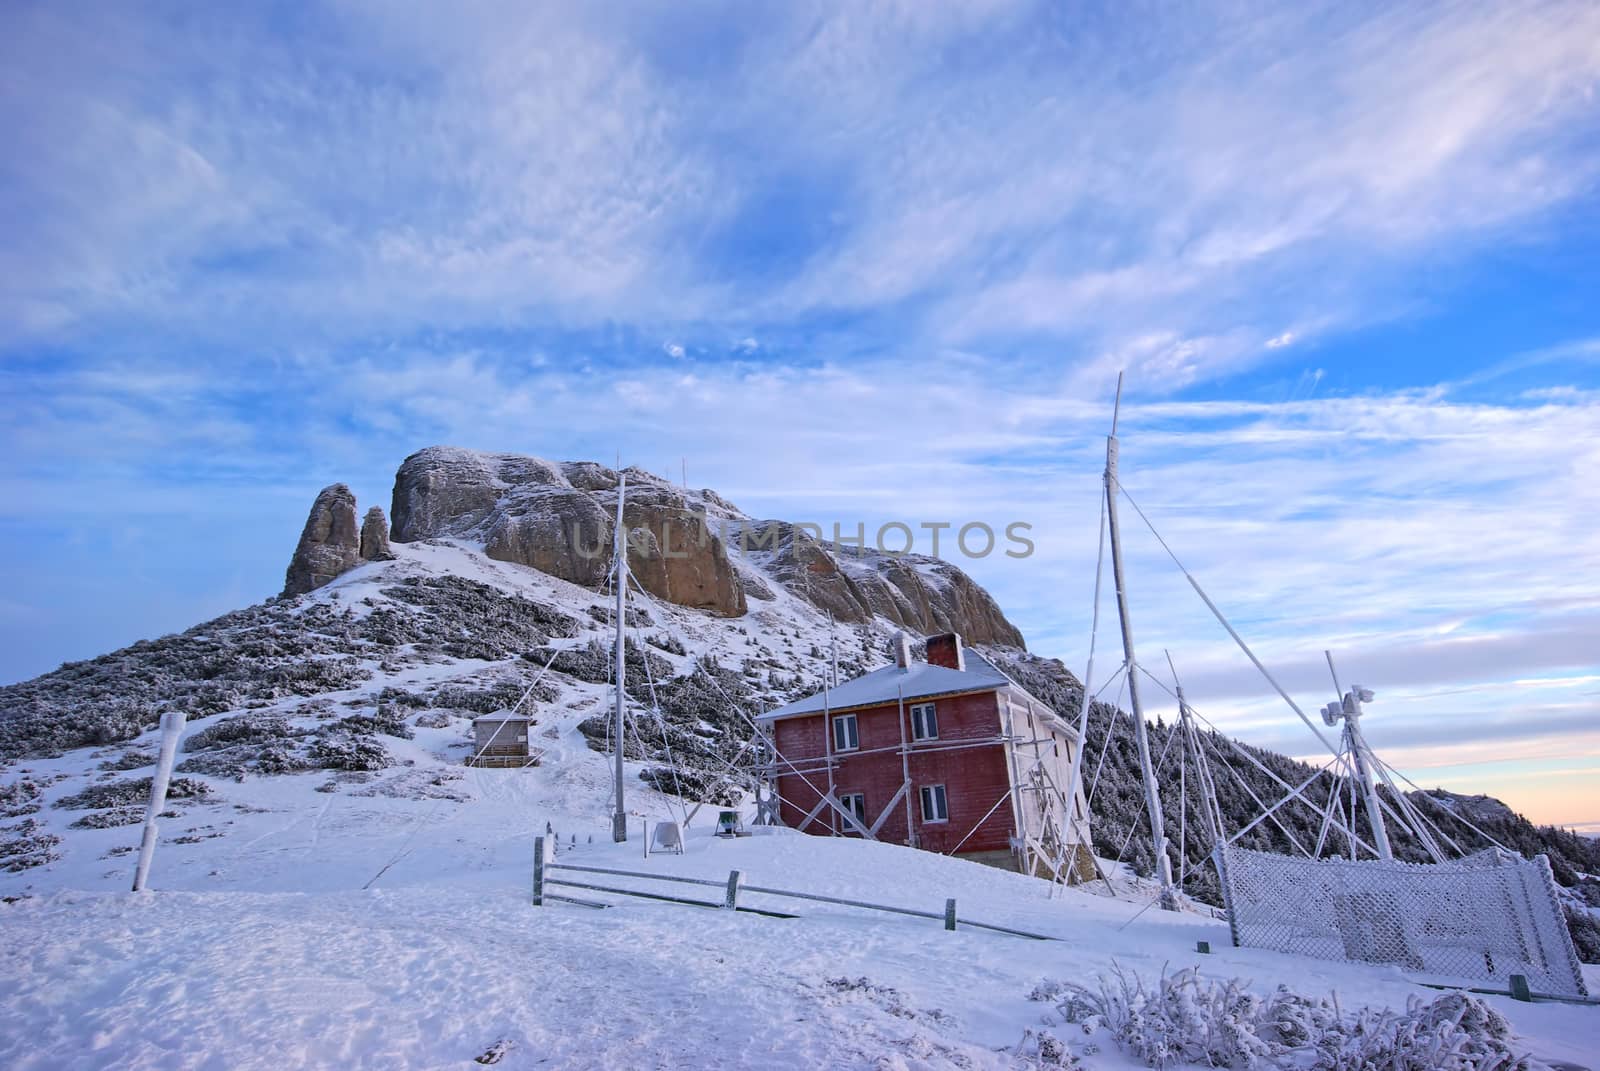 Frozen chalet and winter scene on mountain by savcoco